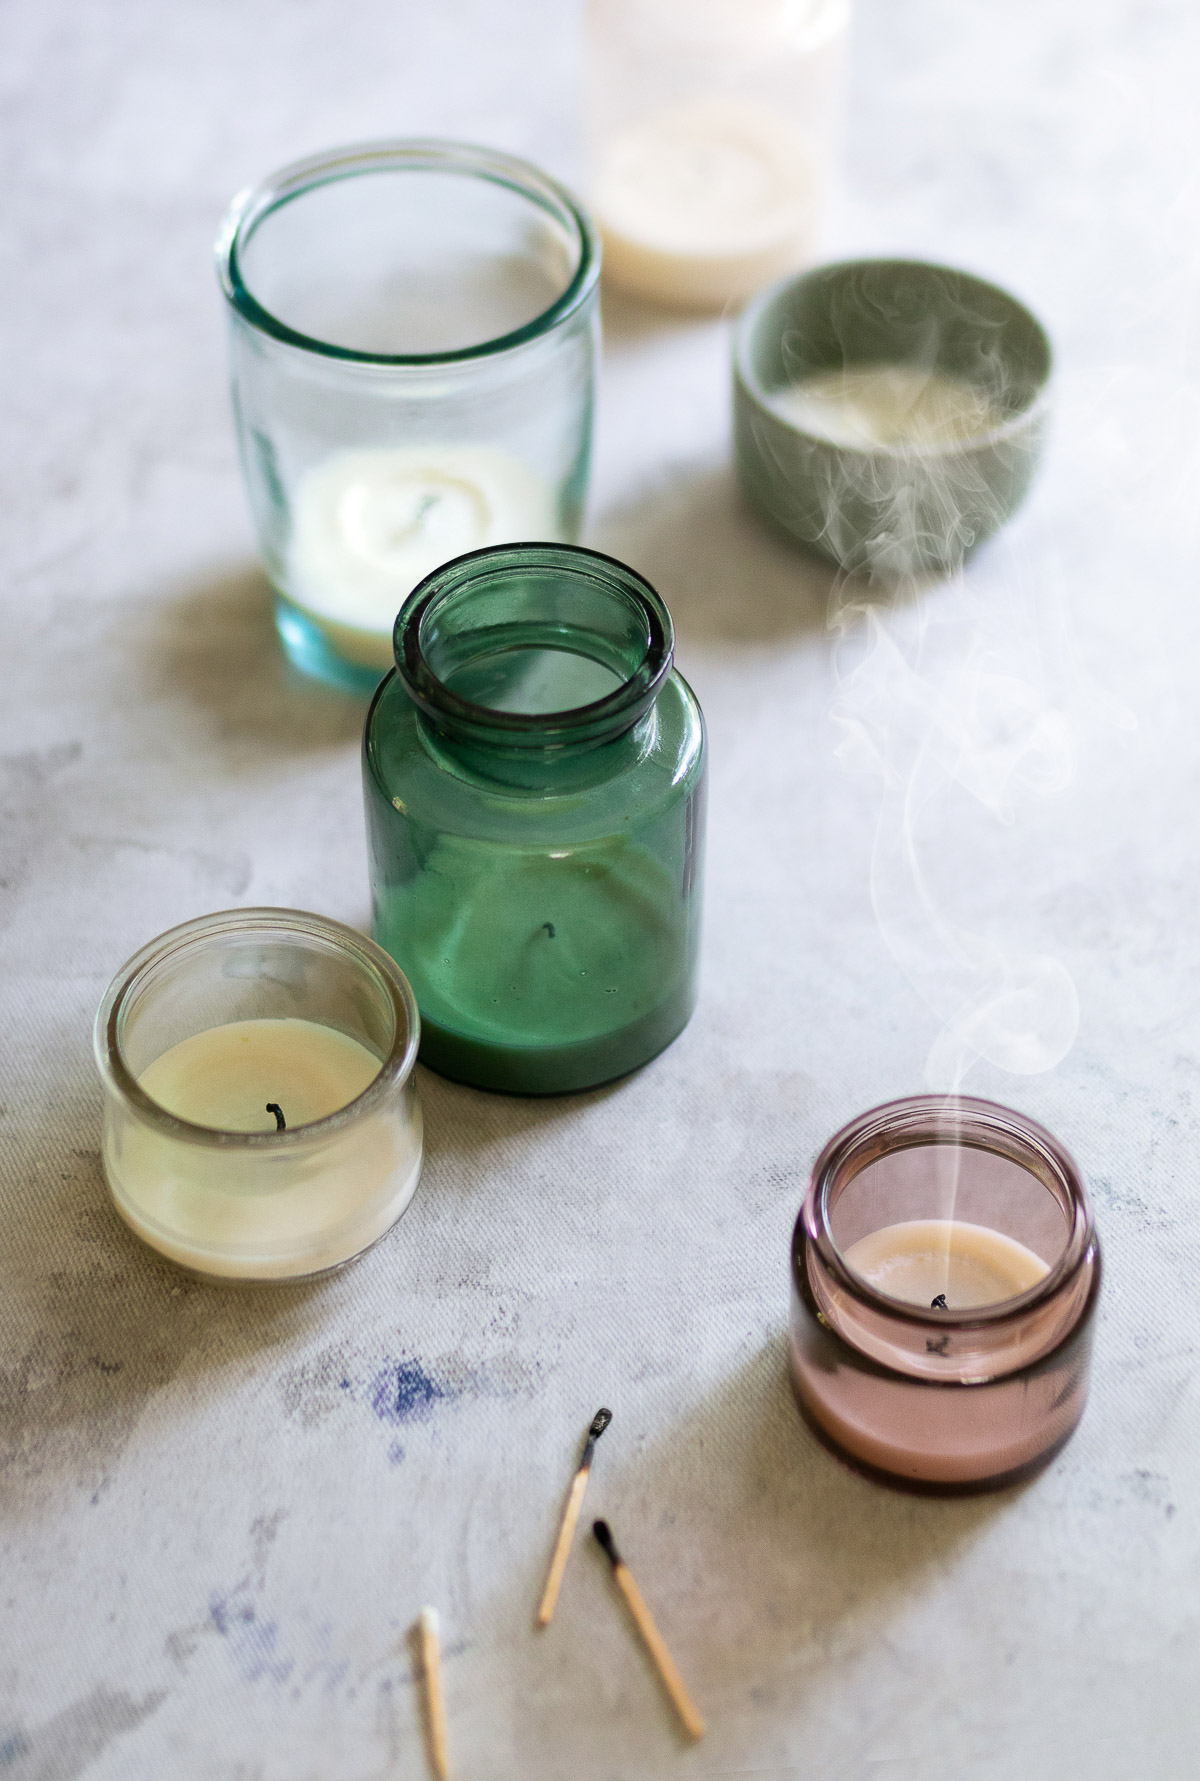 Here's how to get wax out of old candles and put that containers to good use